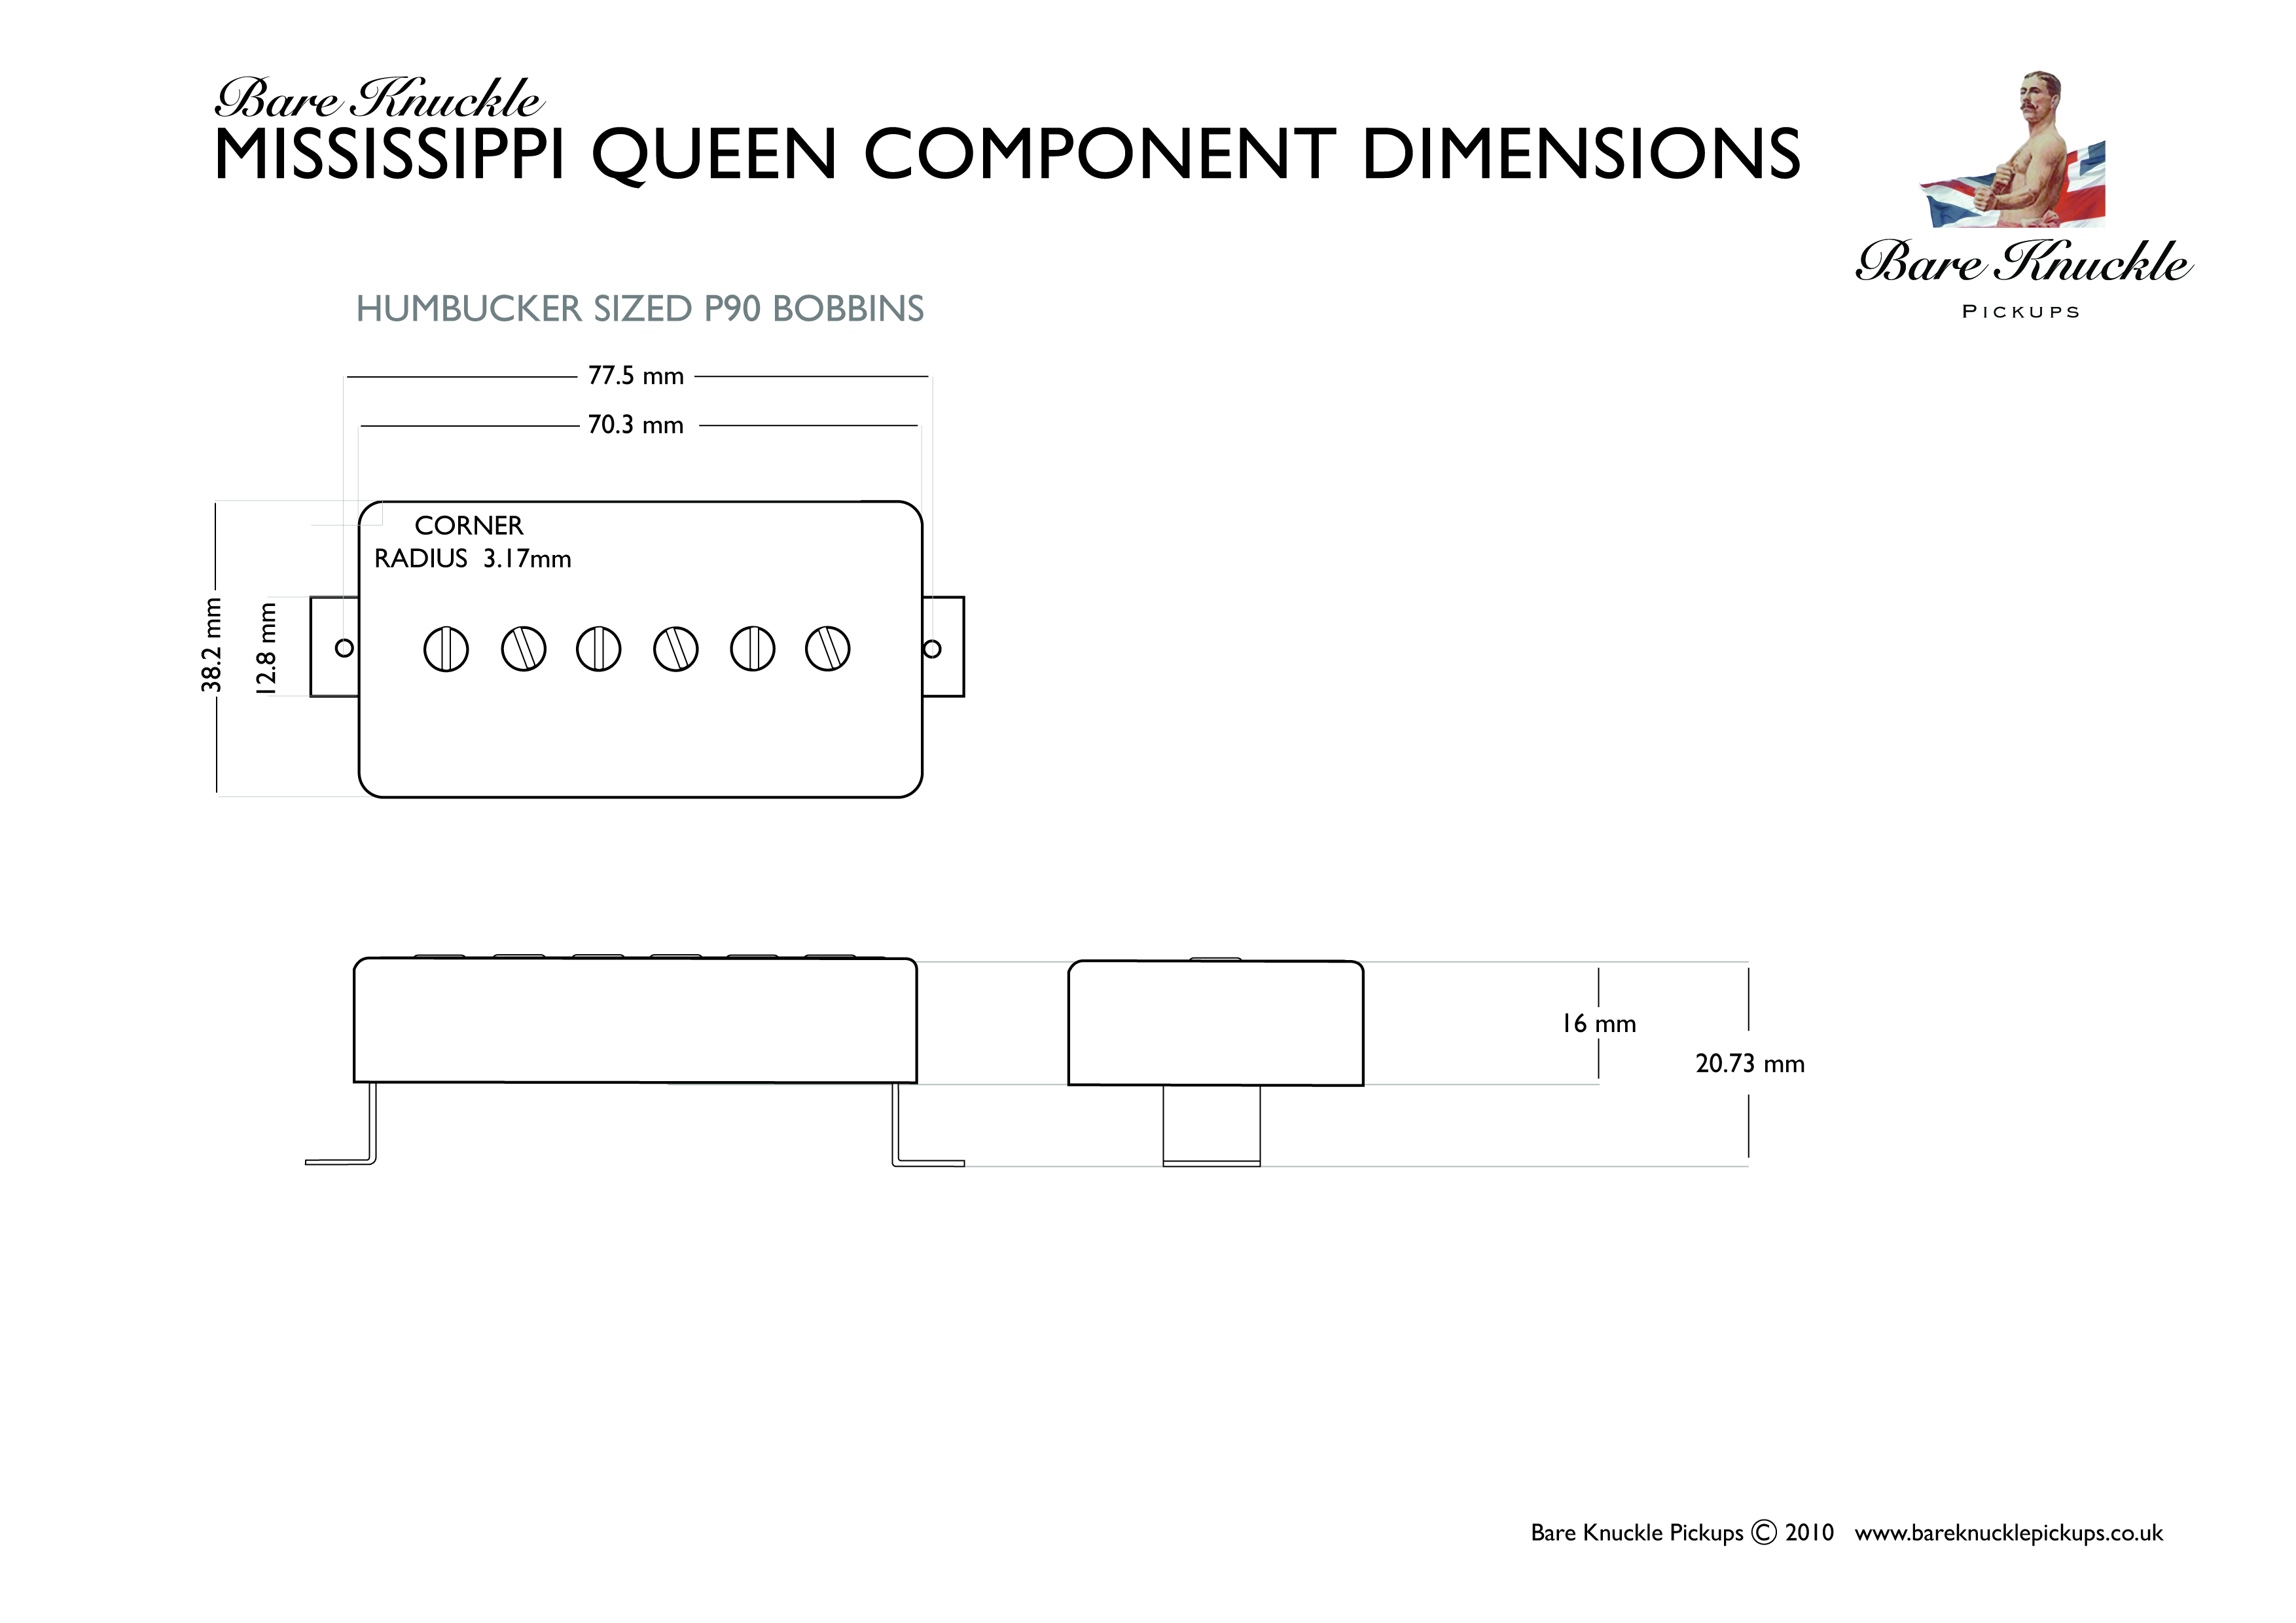 Telecaster Wiring Diagram 3 Way Import Switch from www.bareknucklepickups.co.uk